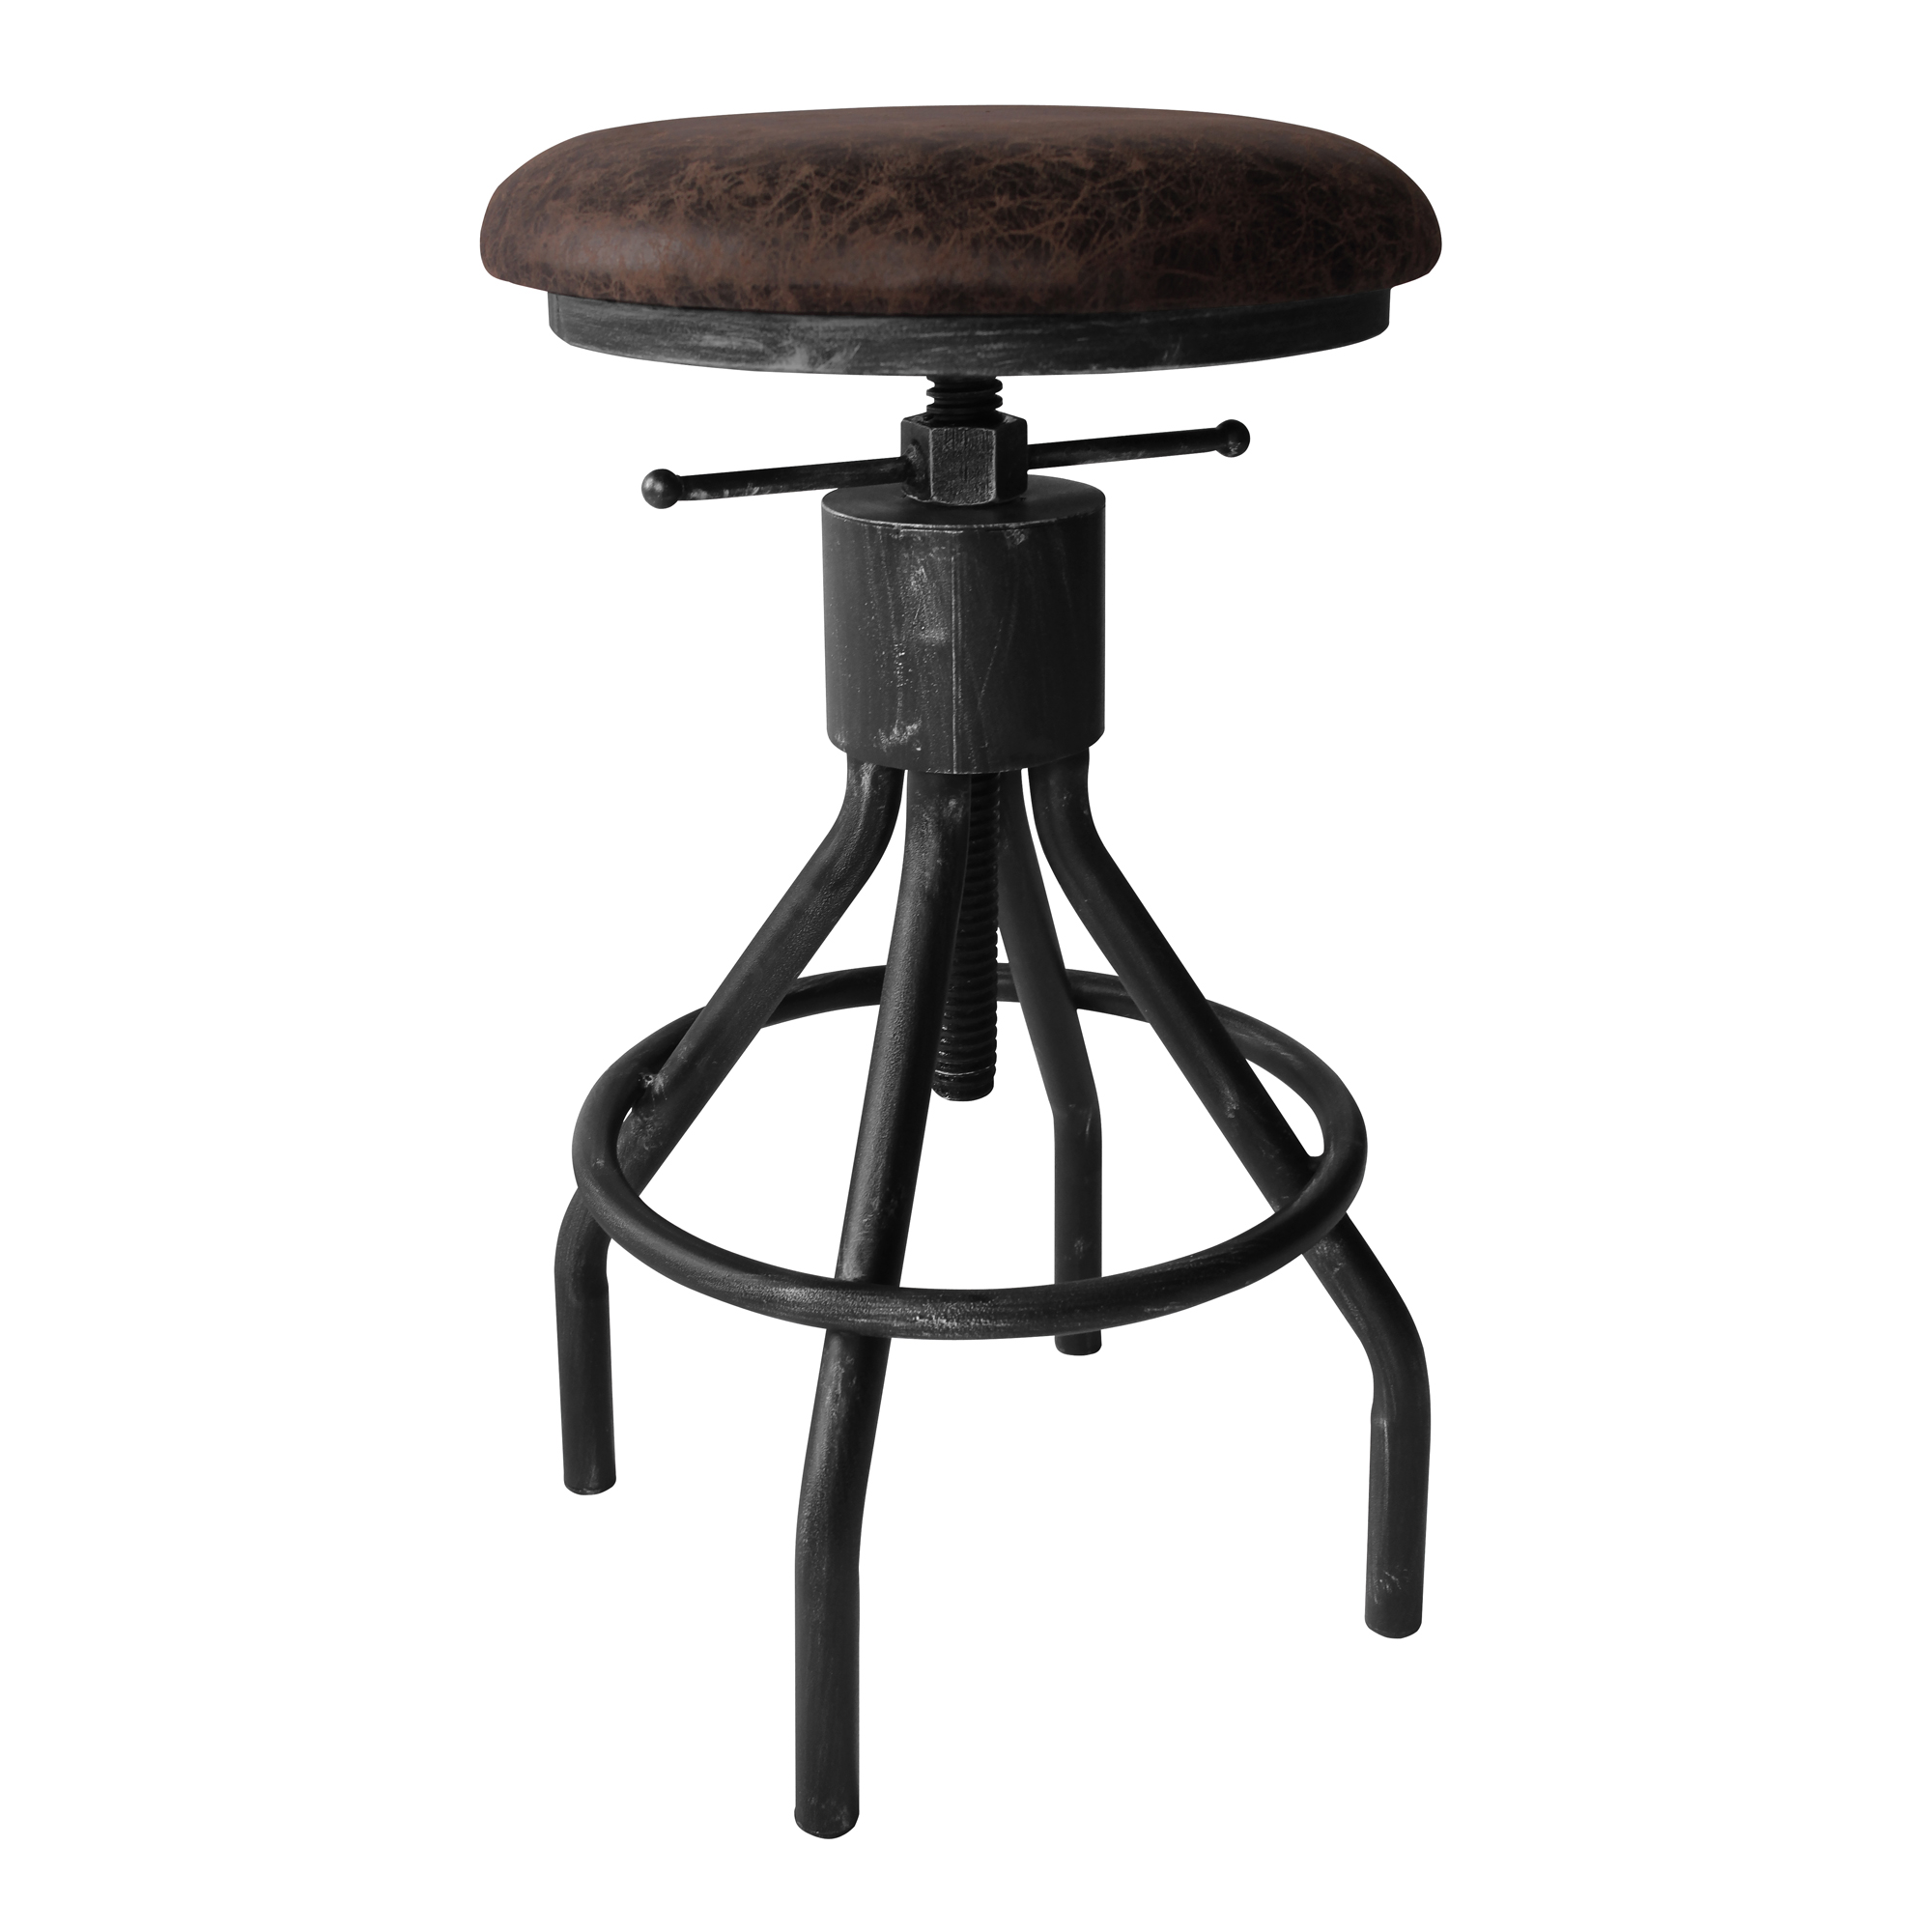 Today's Mentality Paris Industrial Adjustable Backless Barstool in Silver Brushed Gray with Brown Fabric Seat